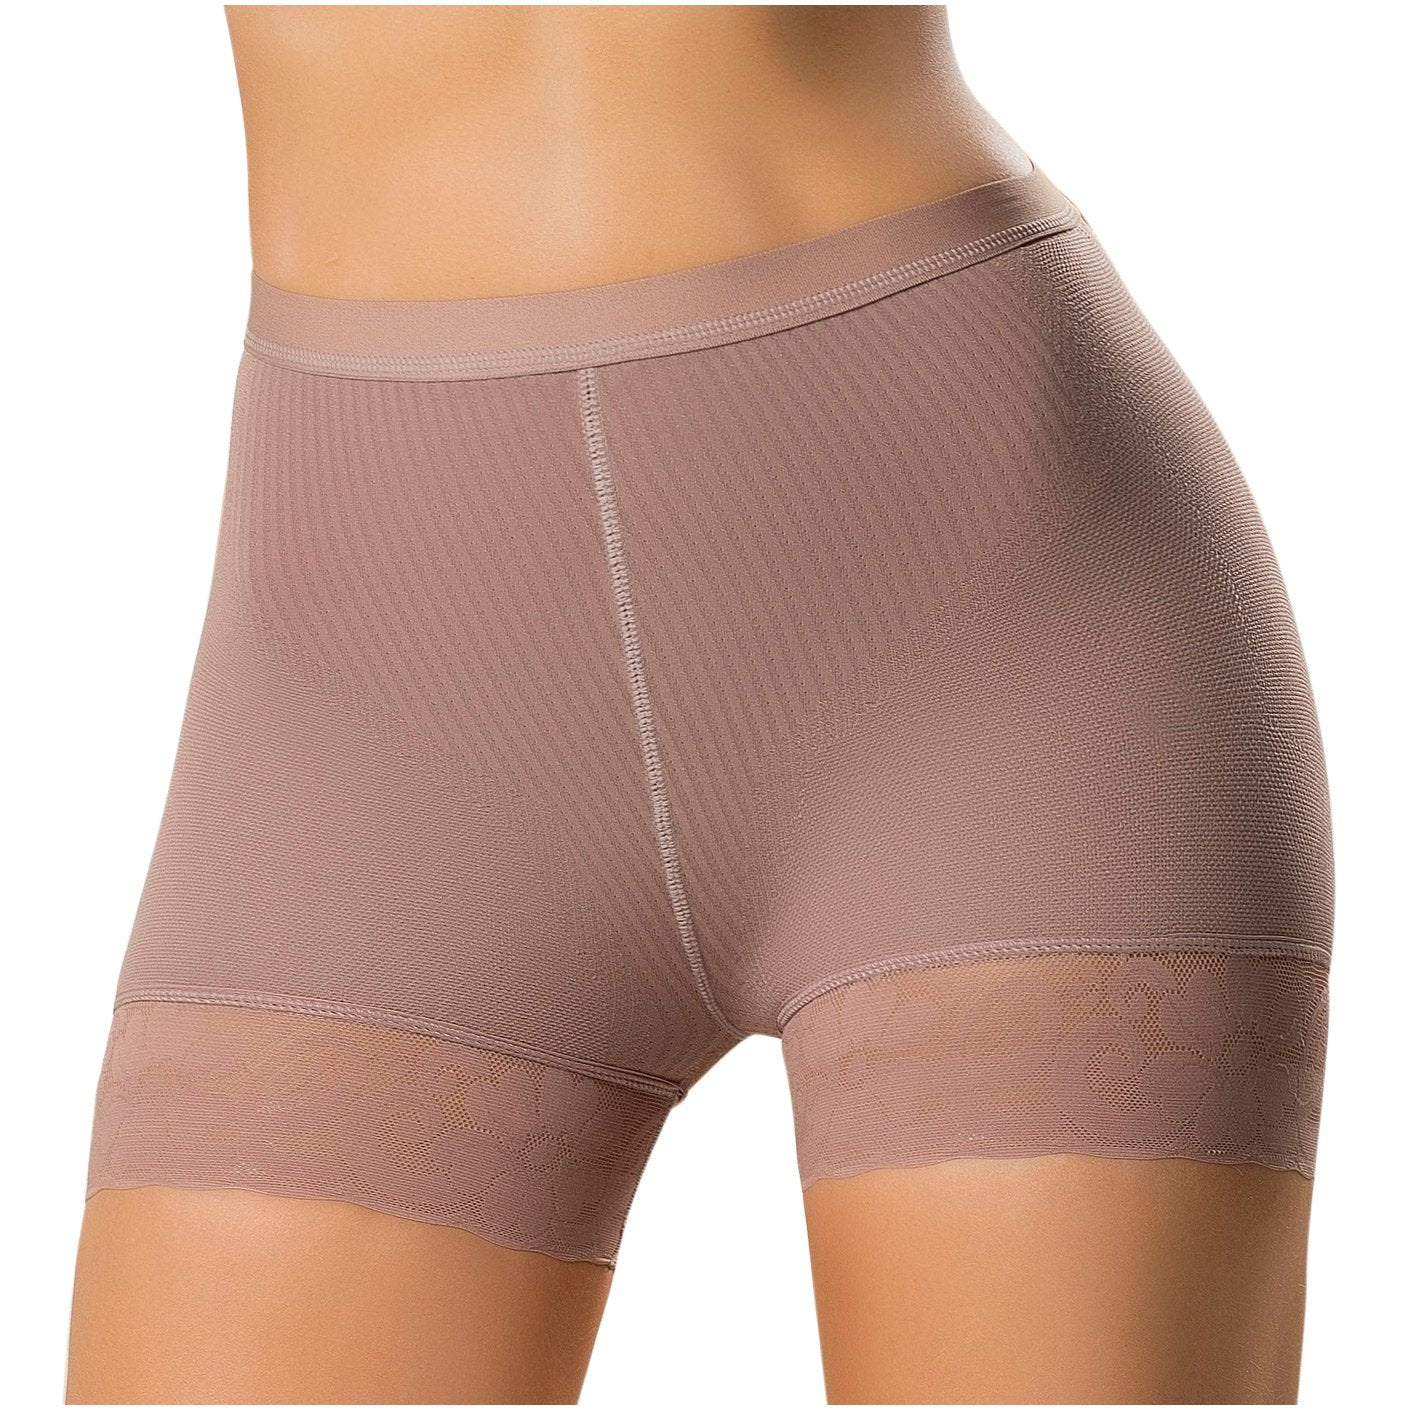 LT.Rose 21897 Butt Lifter Body Shaper Panties with Holes Calzones